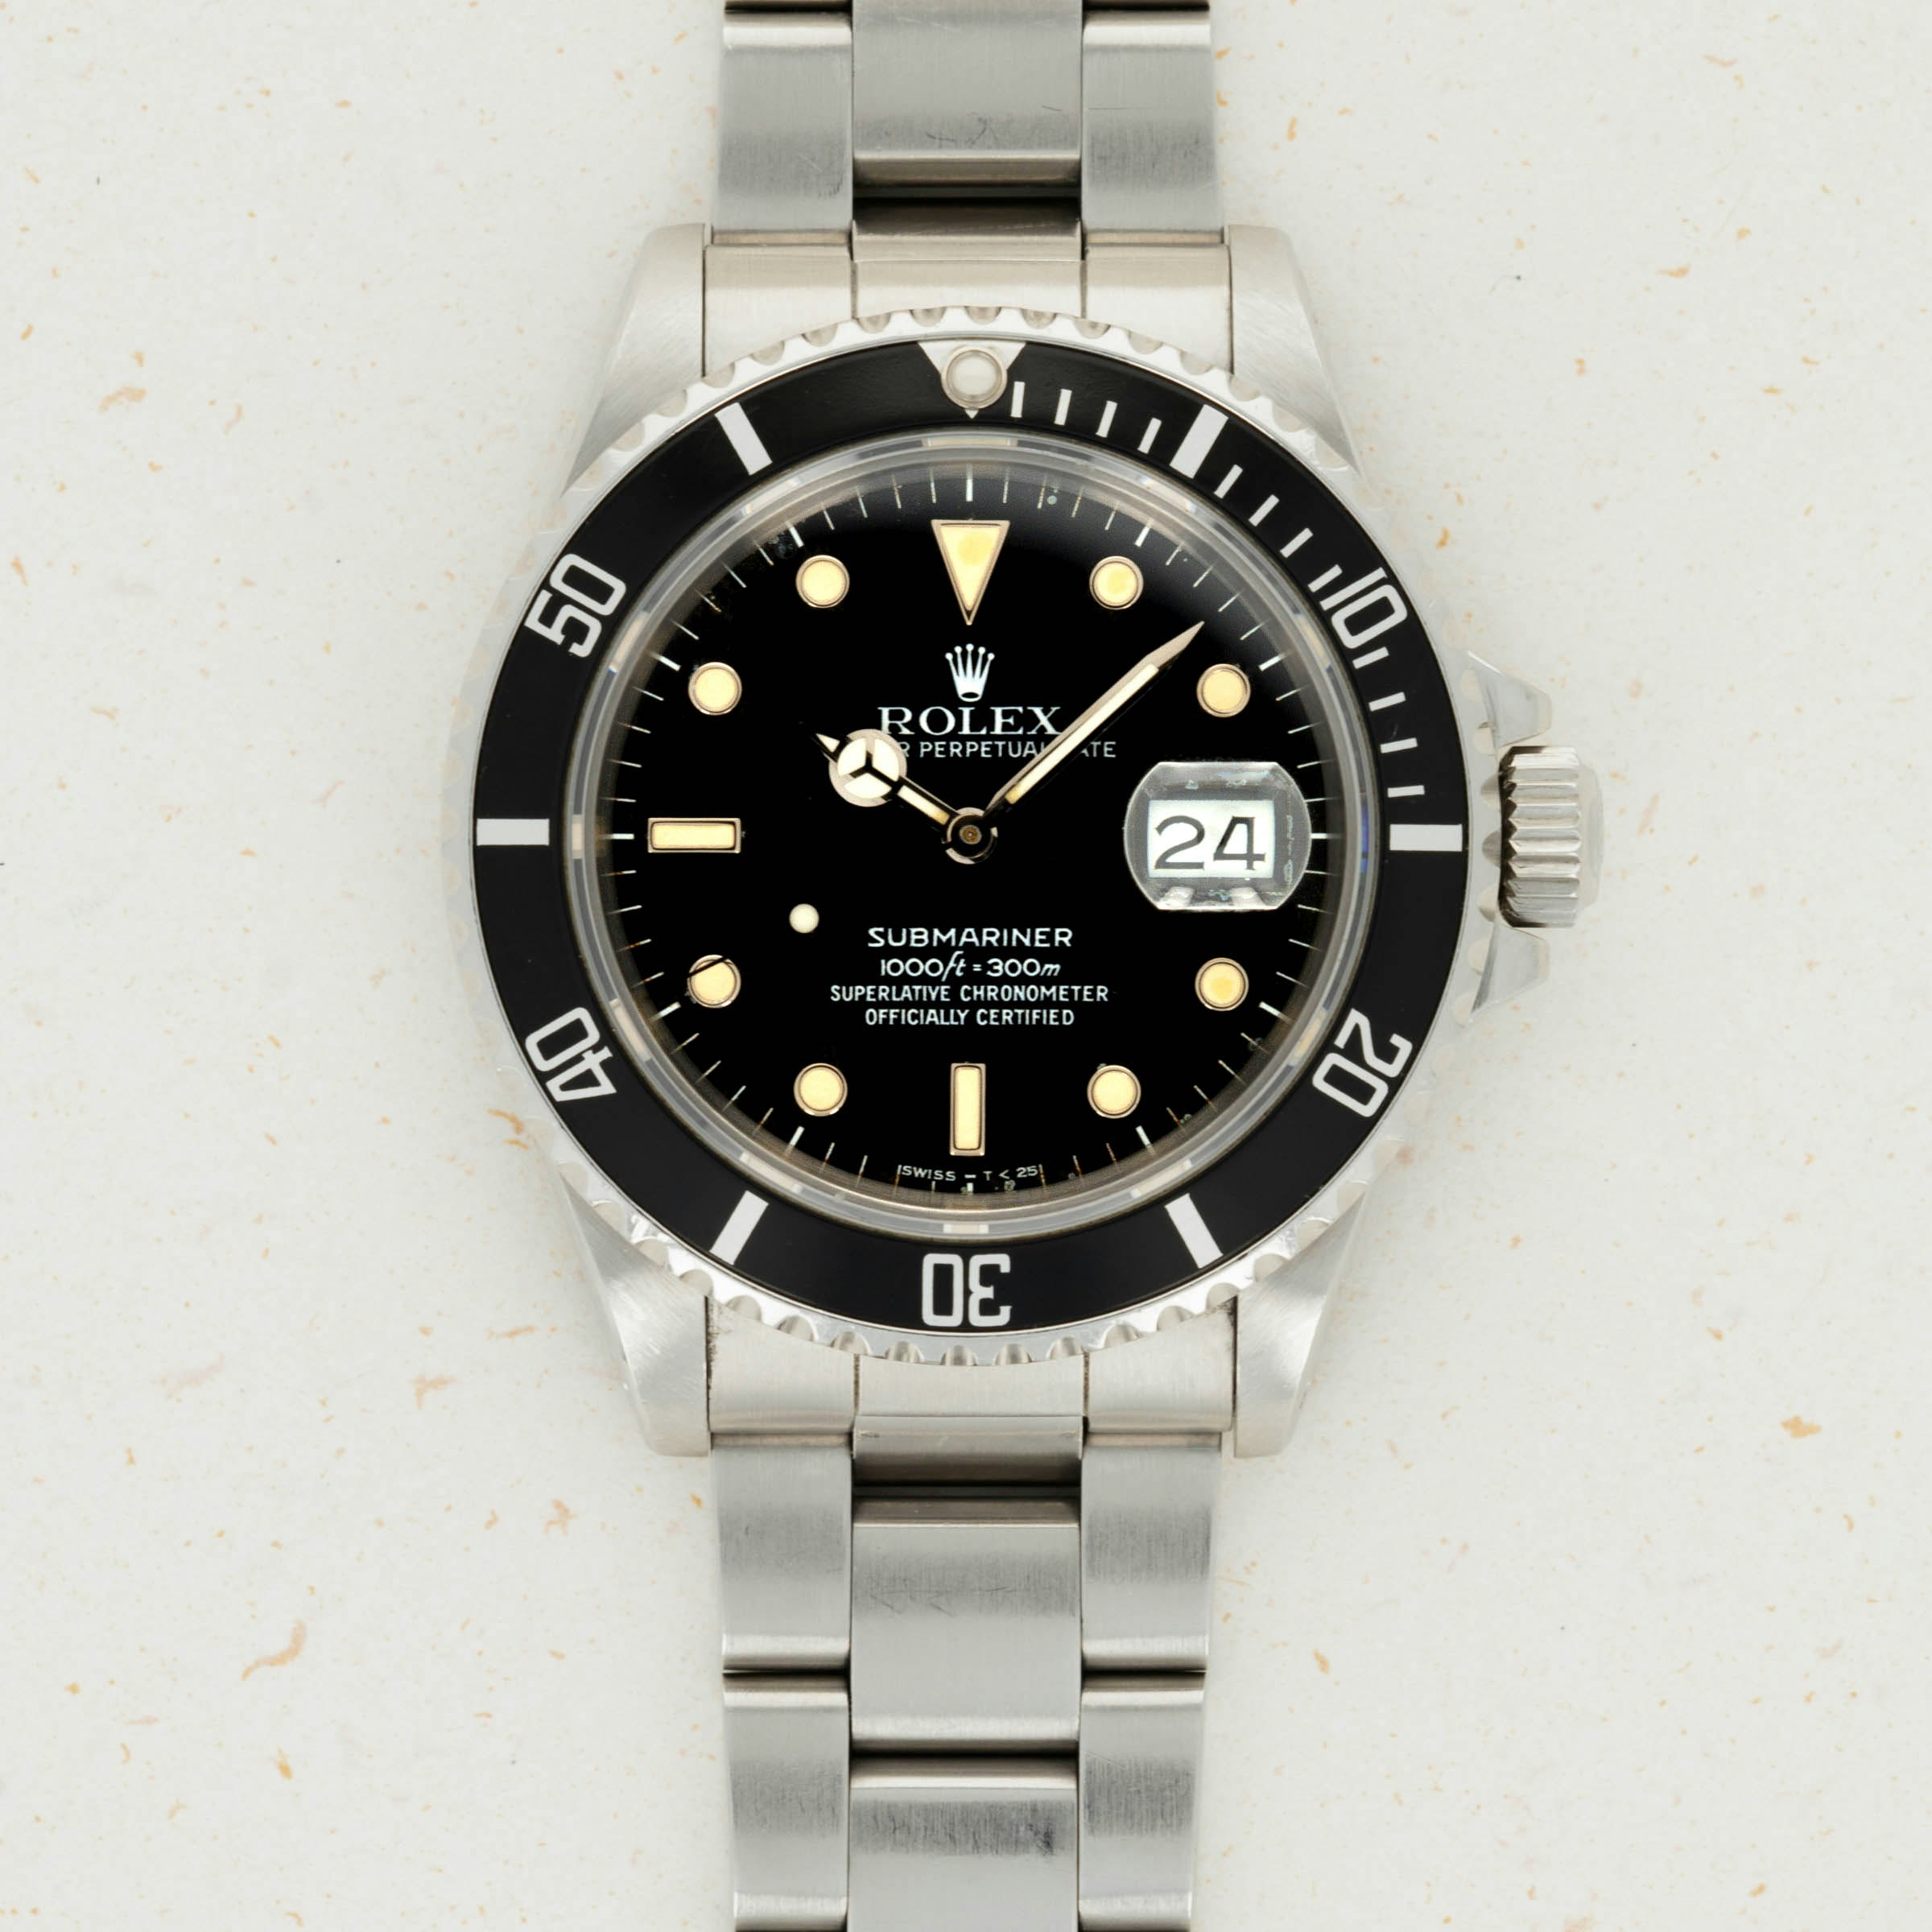 Thumbnail for Rolex Submariner 16800 With Guarantee